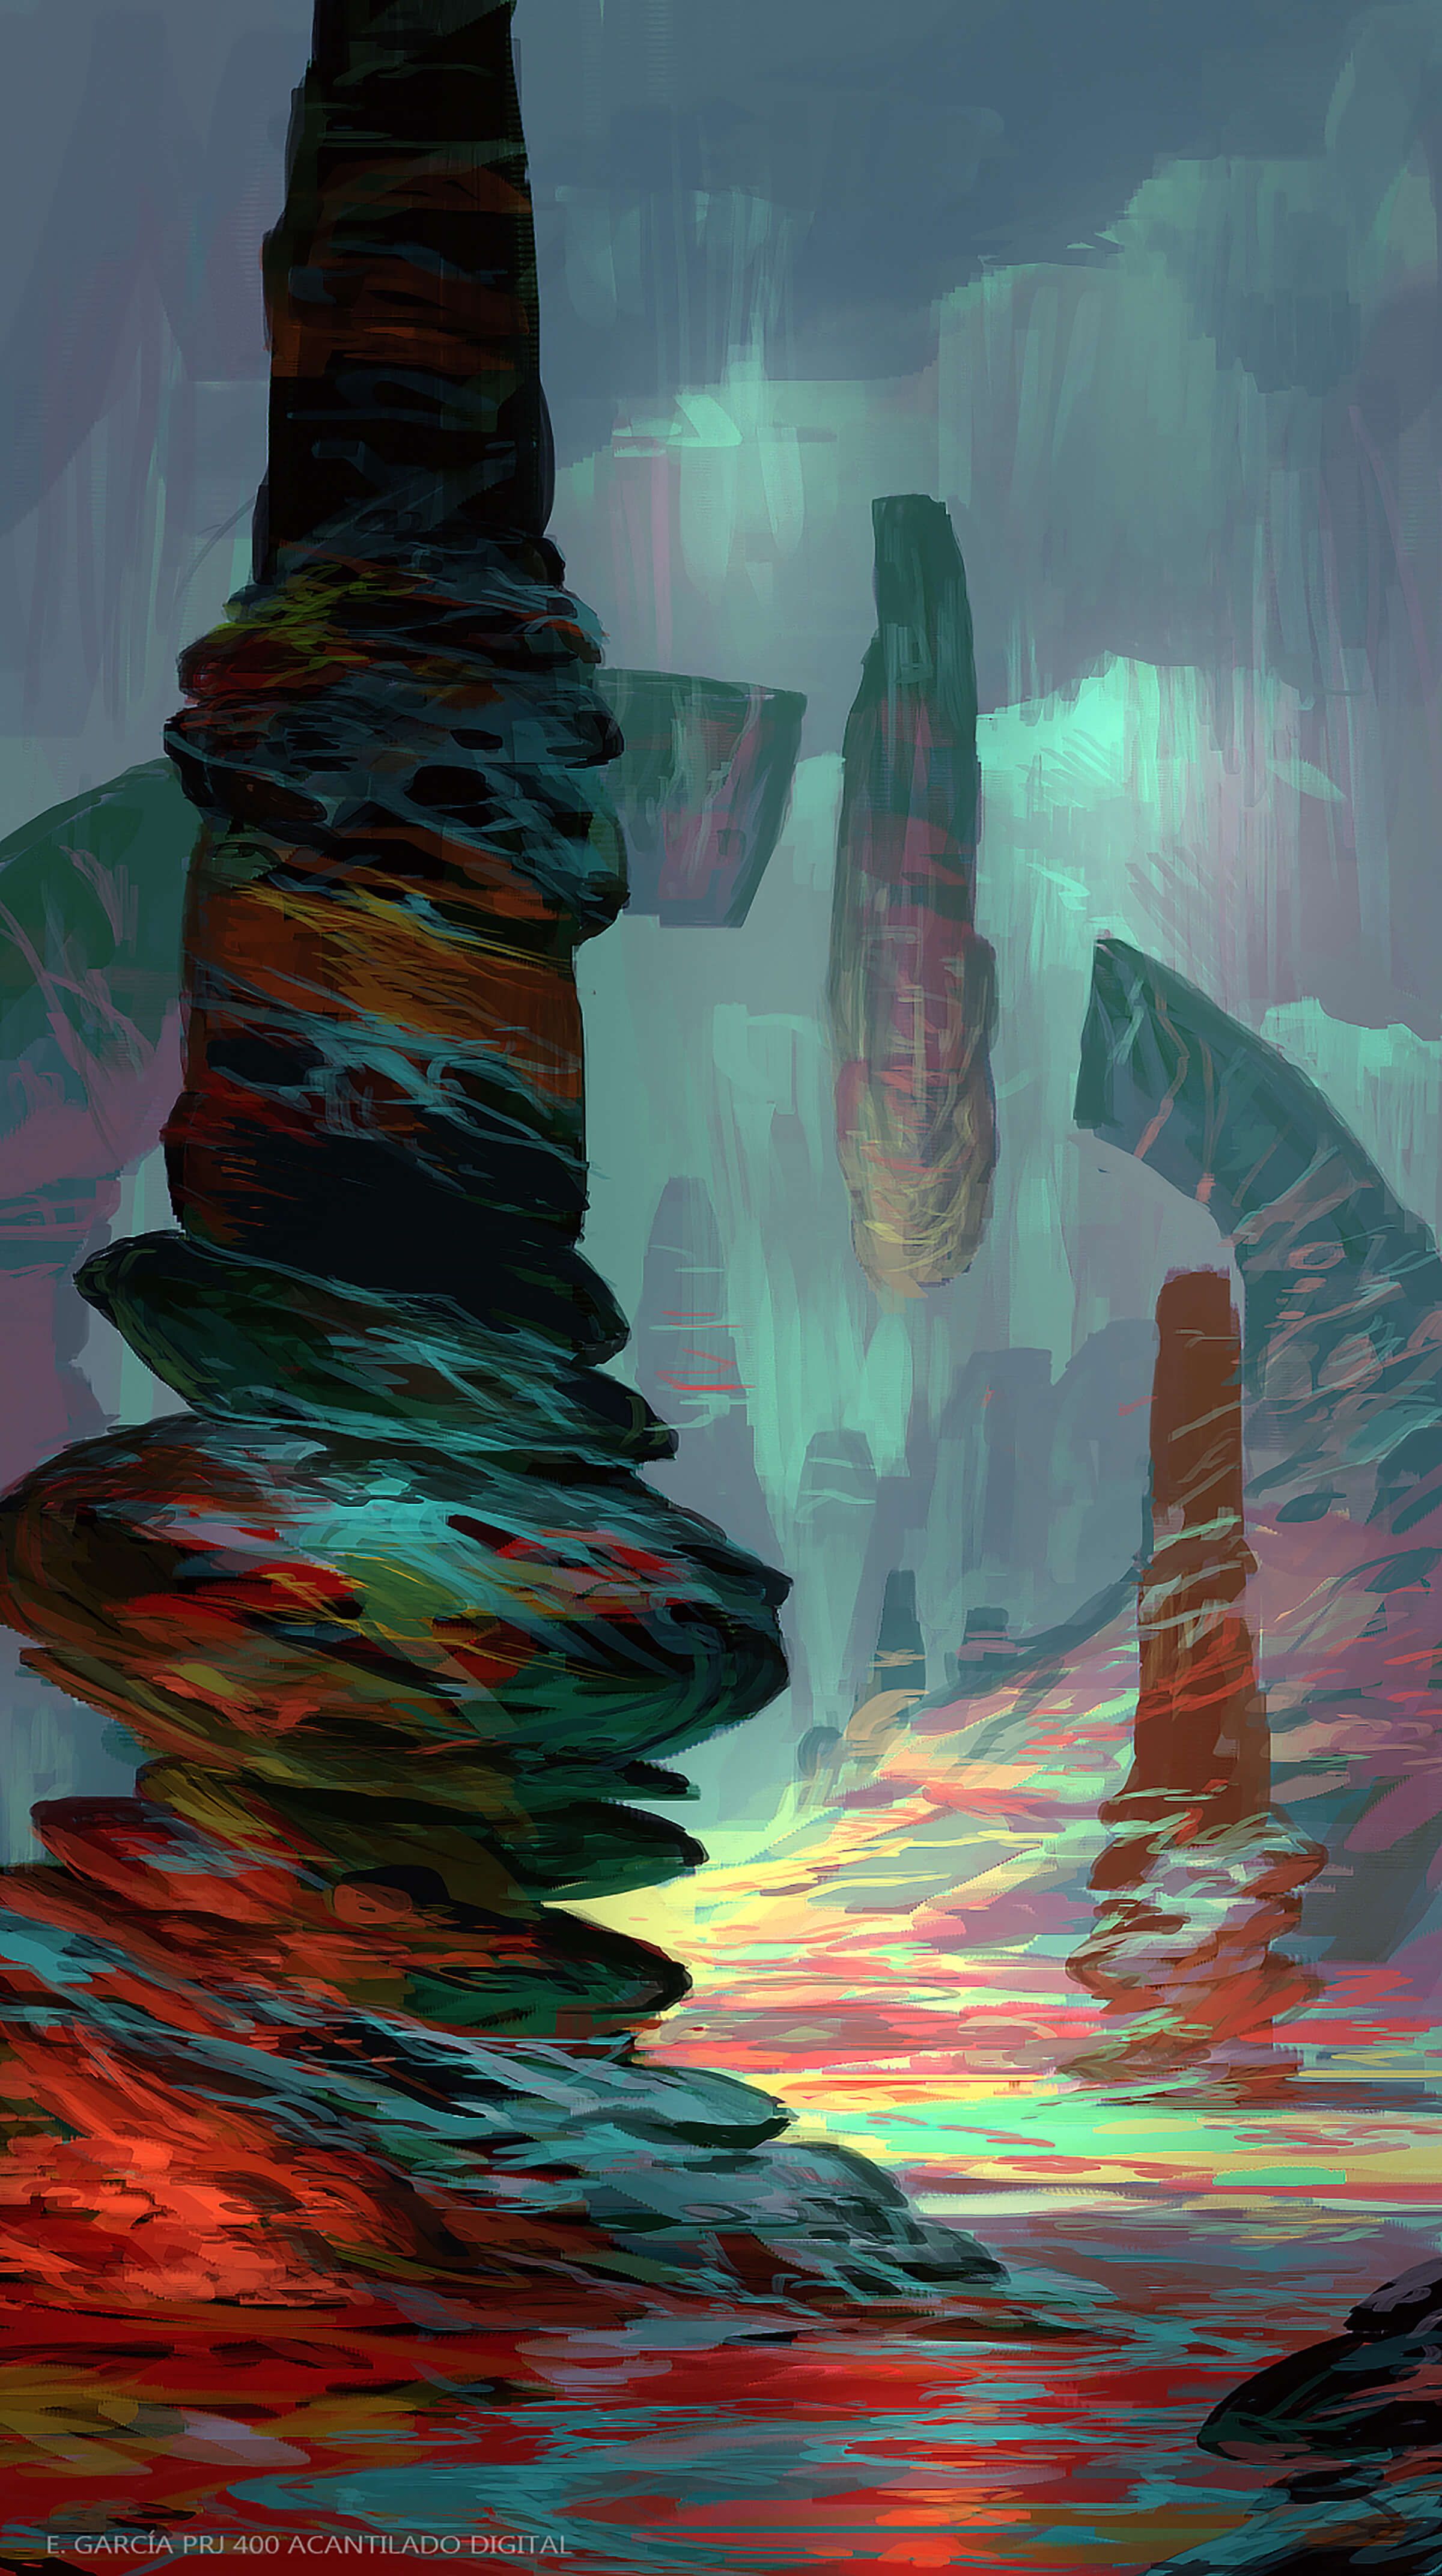 A rocky, alien environment with colorful outcroppings. A slender strip of stone hovers mysteriously above the landscape.